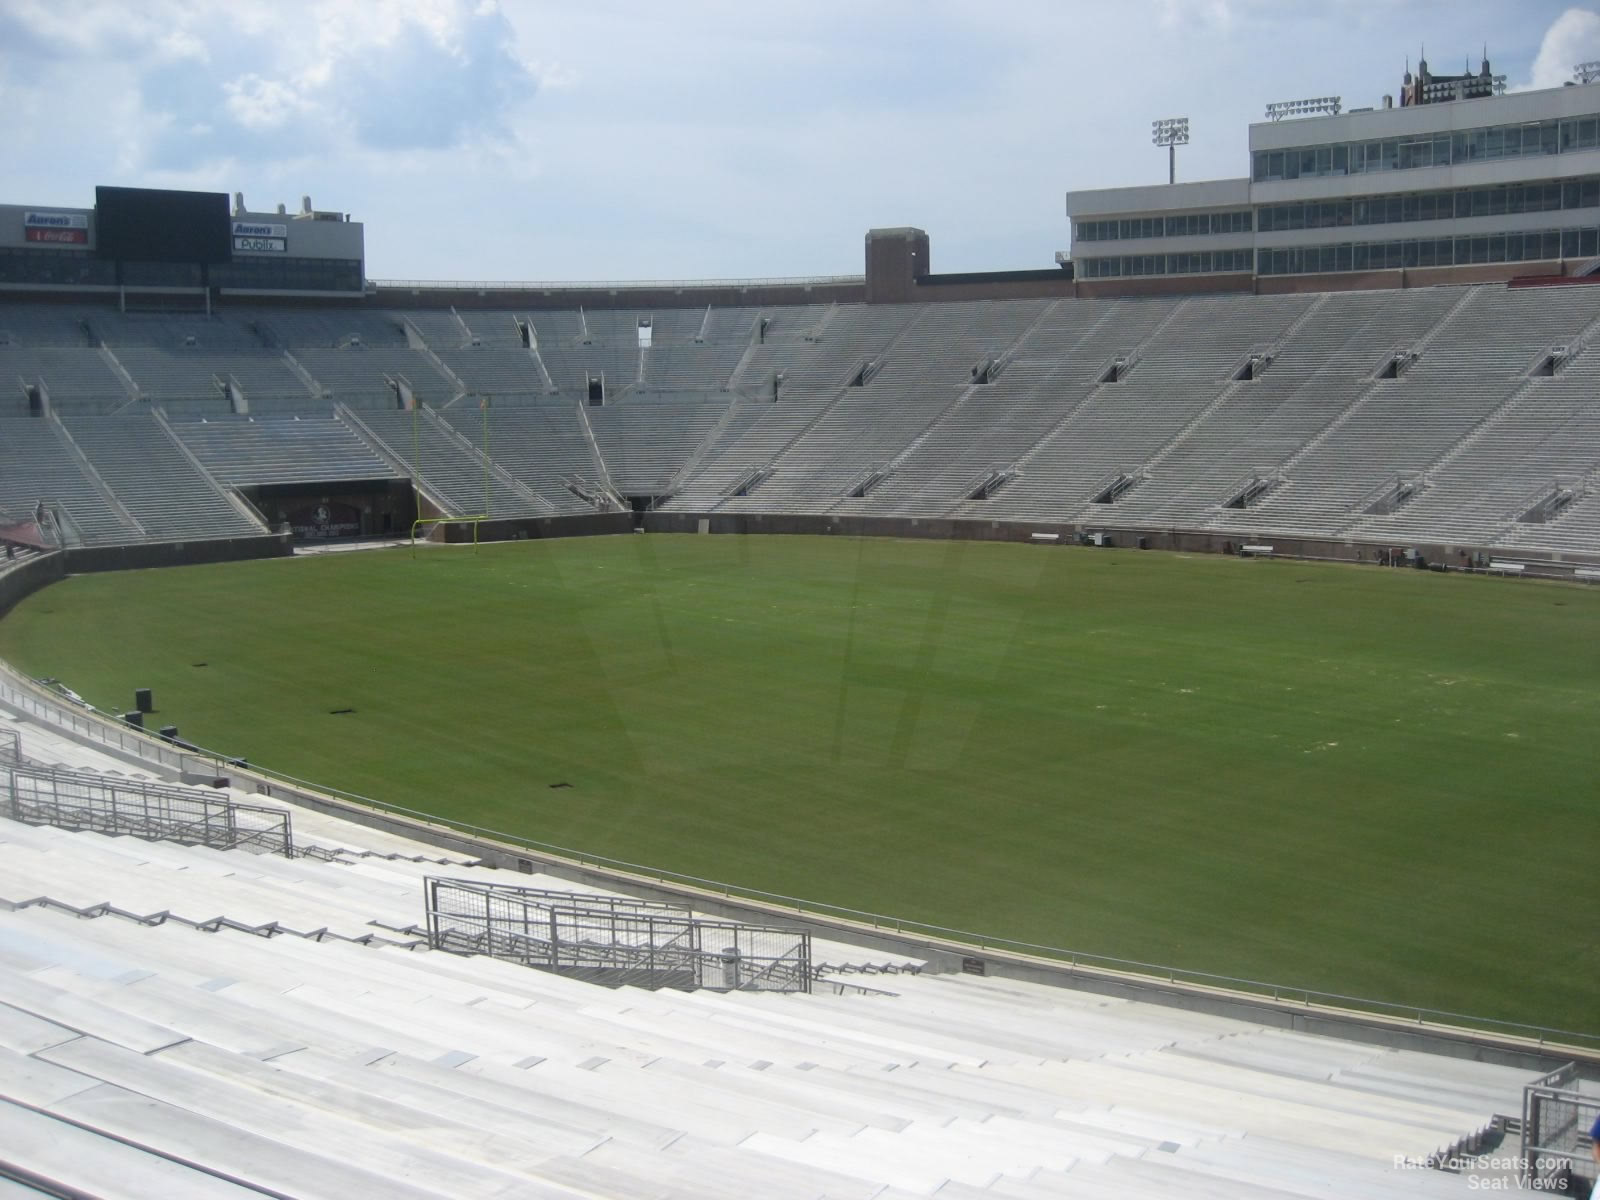 section 5, row 41 seat view  - doak campbell stadium